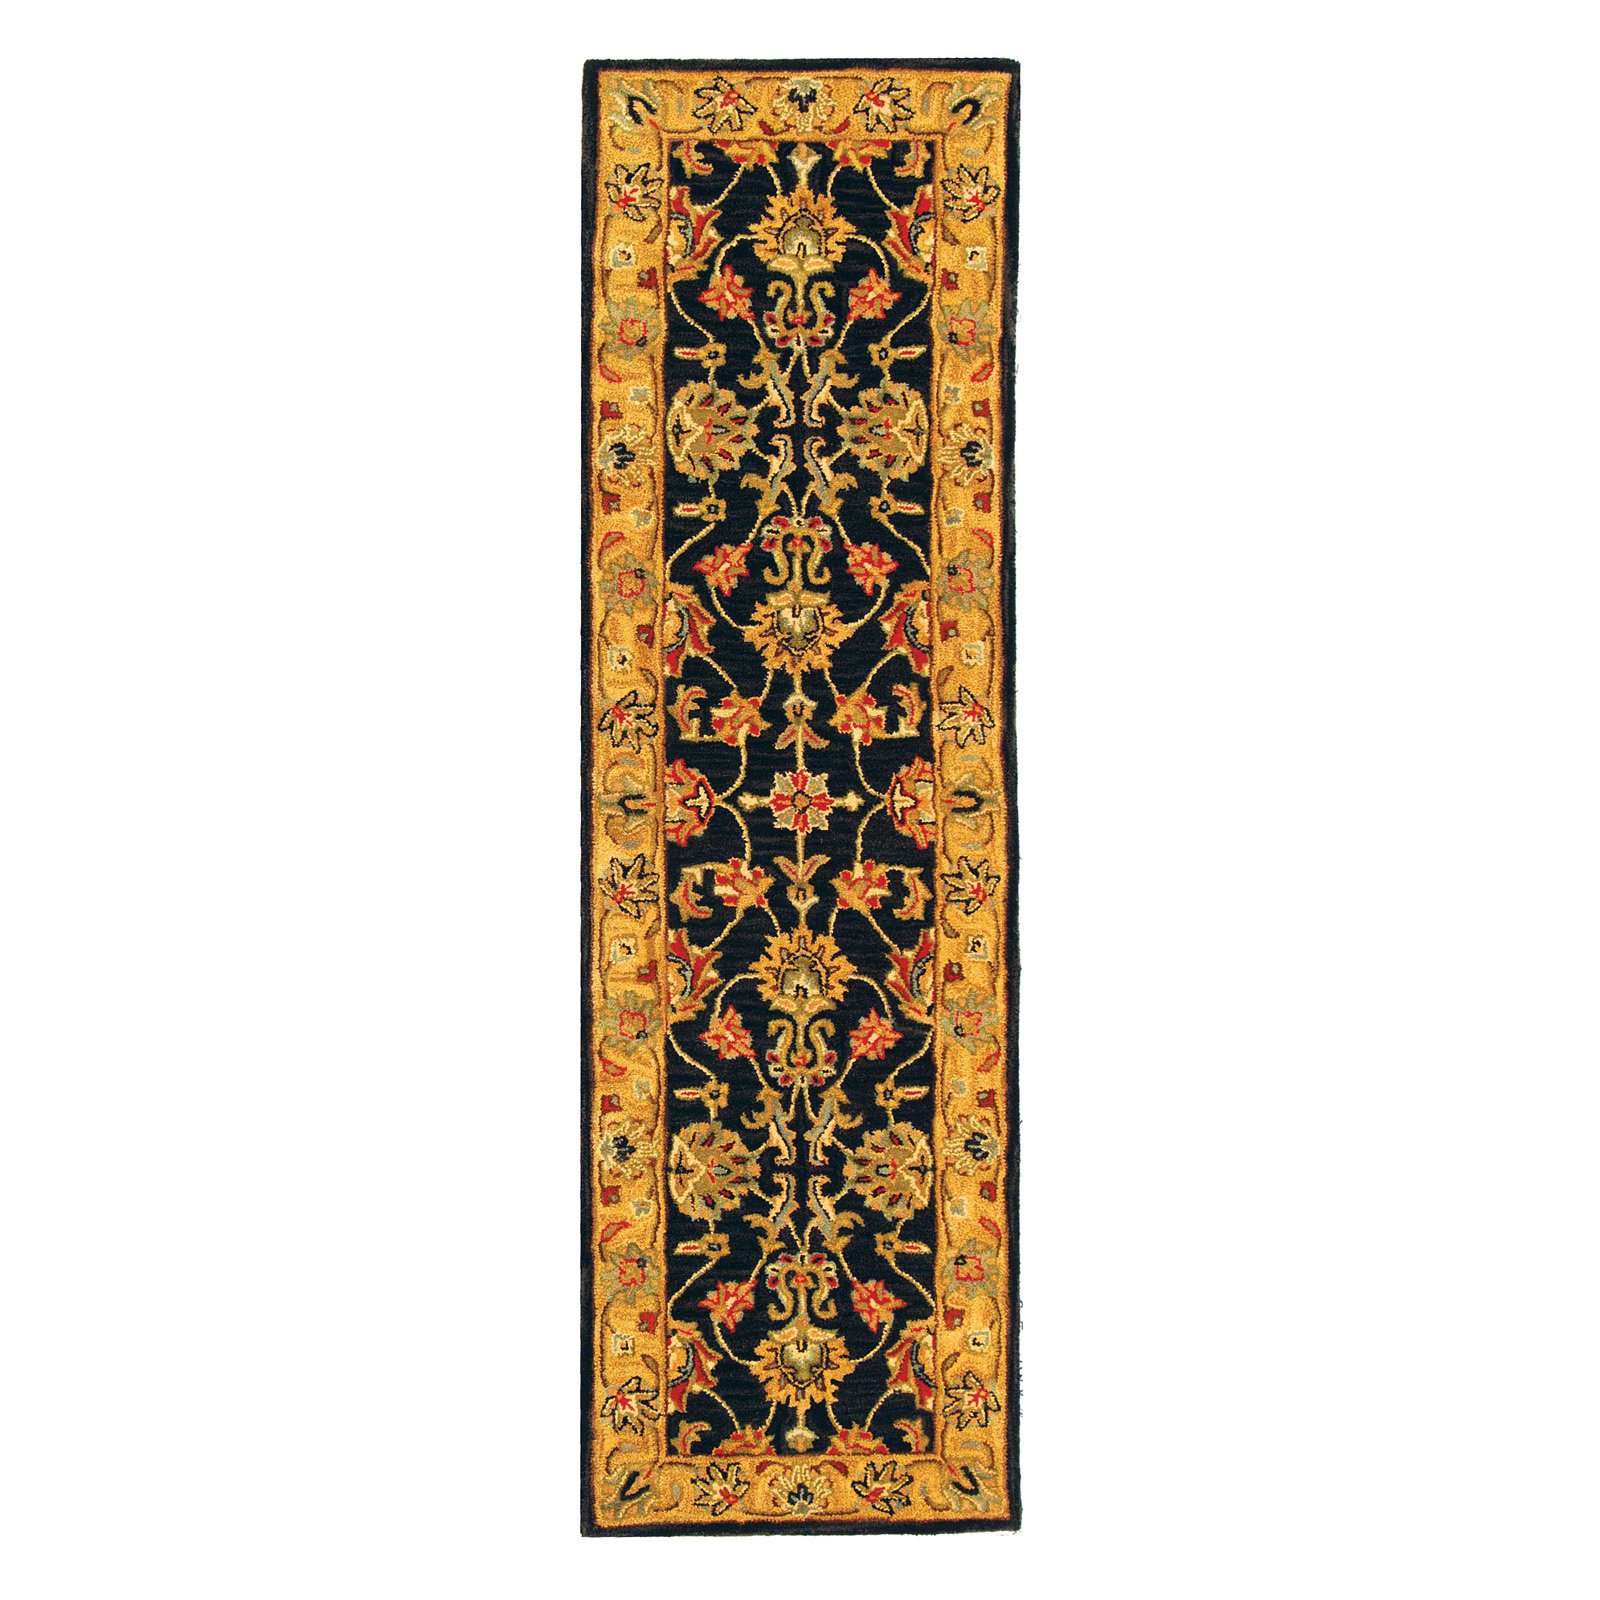 SAFAVIEH Heritage Regis Traditional Wool Area Rug, Charcoal/Gold, 9'6" x 13'6" - image 4 of 10